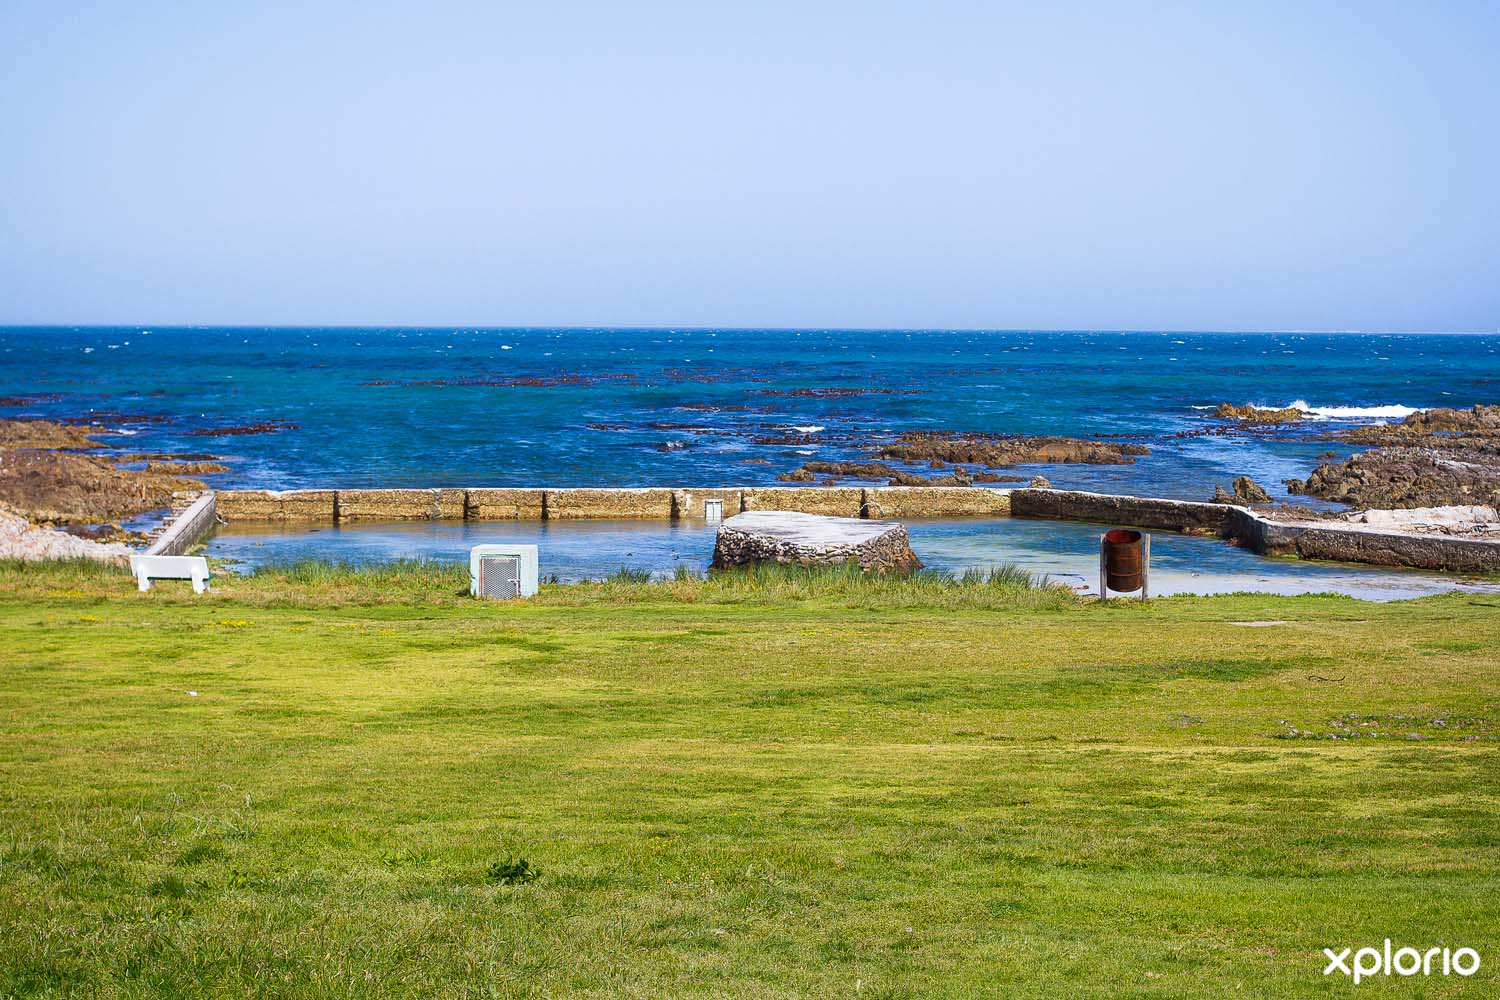 Lush green lawn to relax on at the Kleinbaai Tidal Pool.